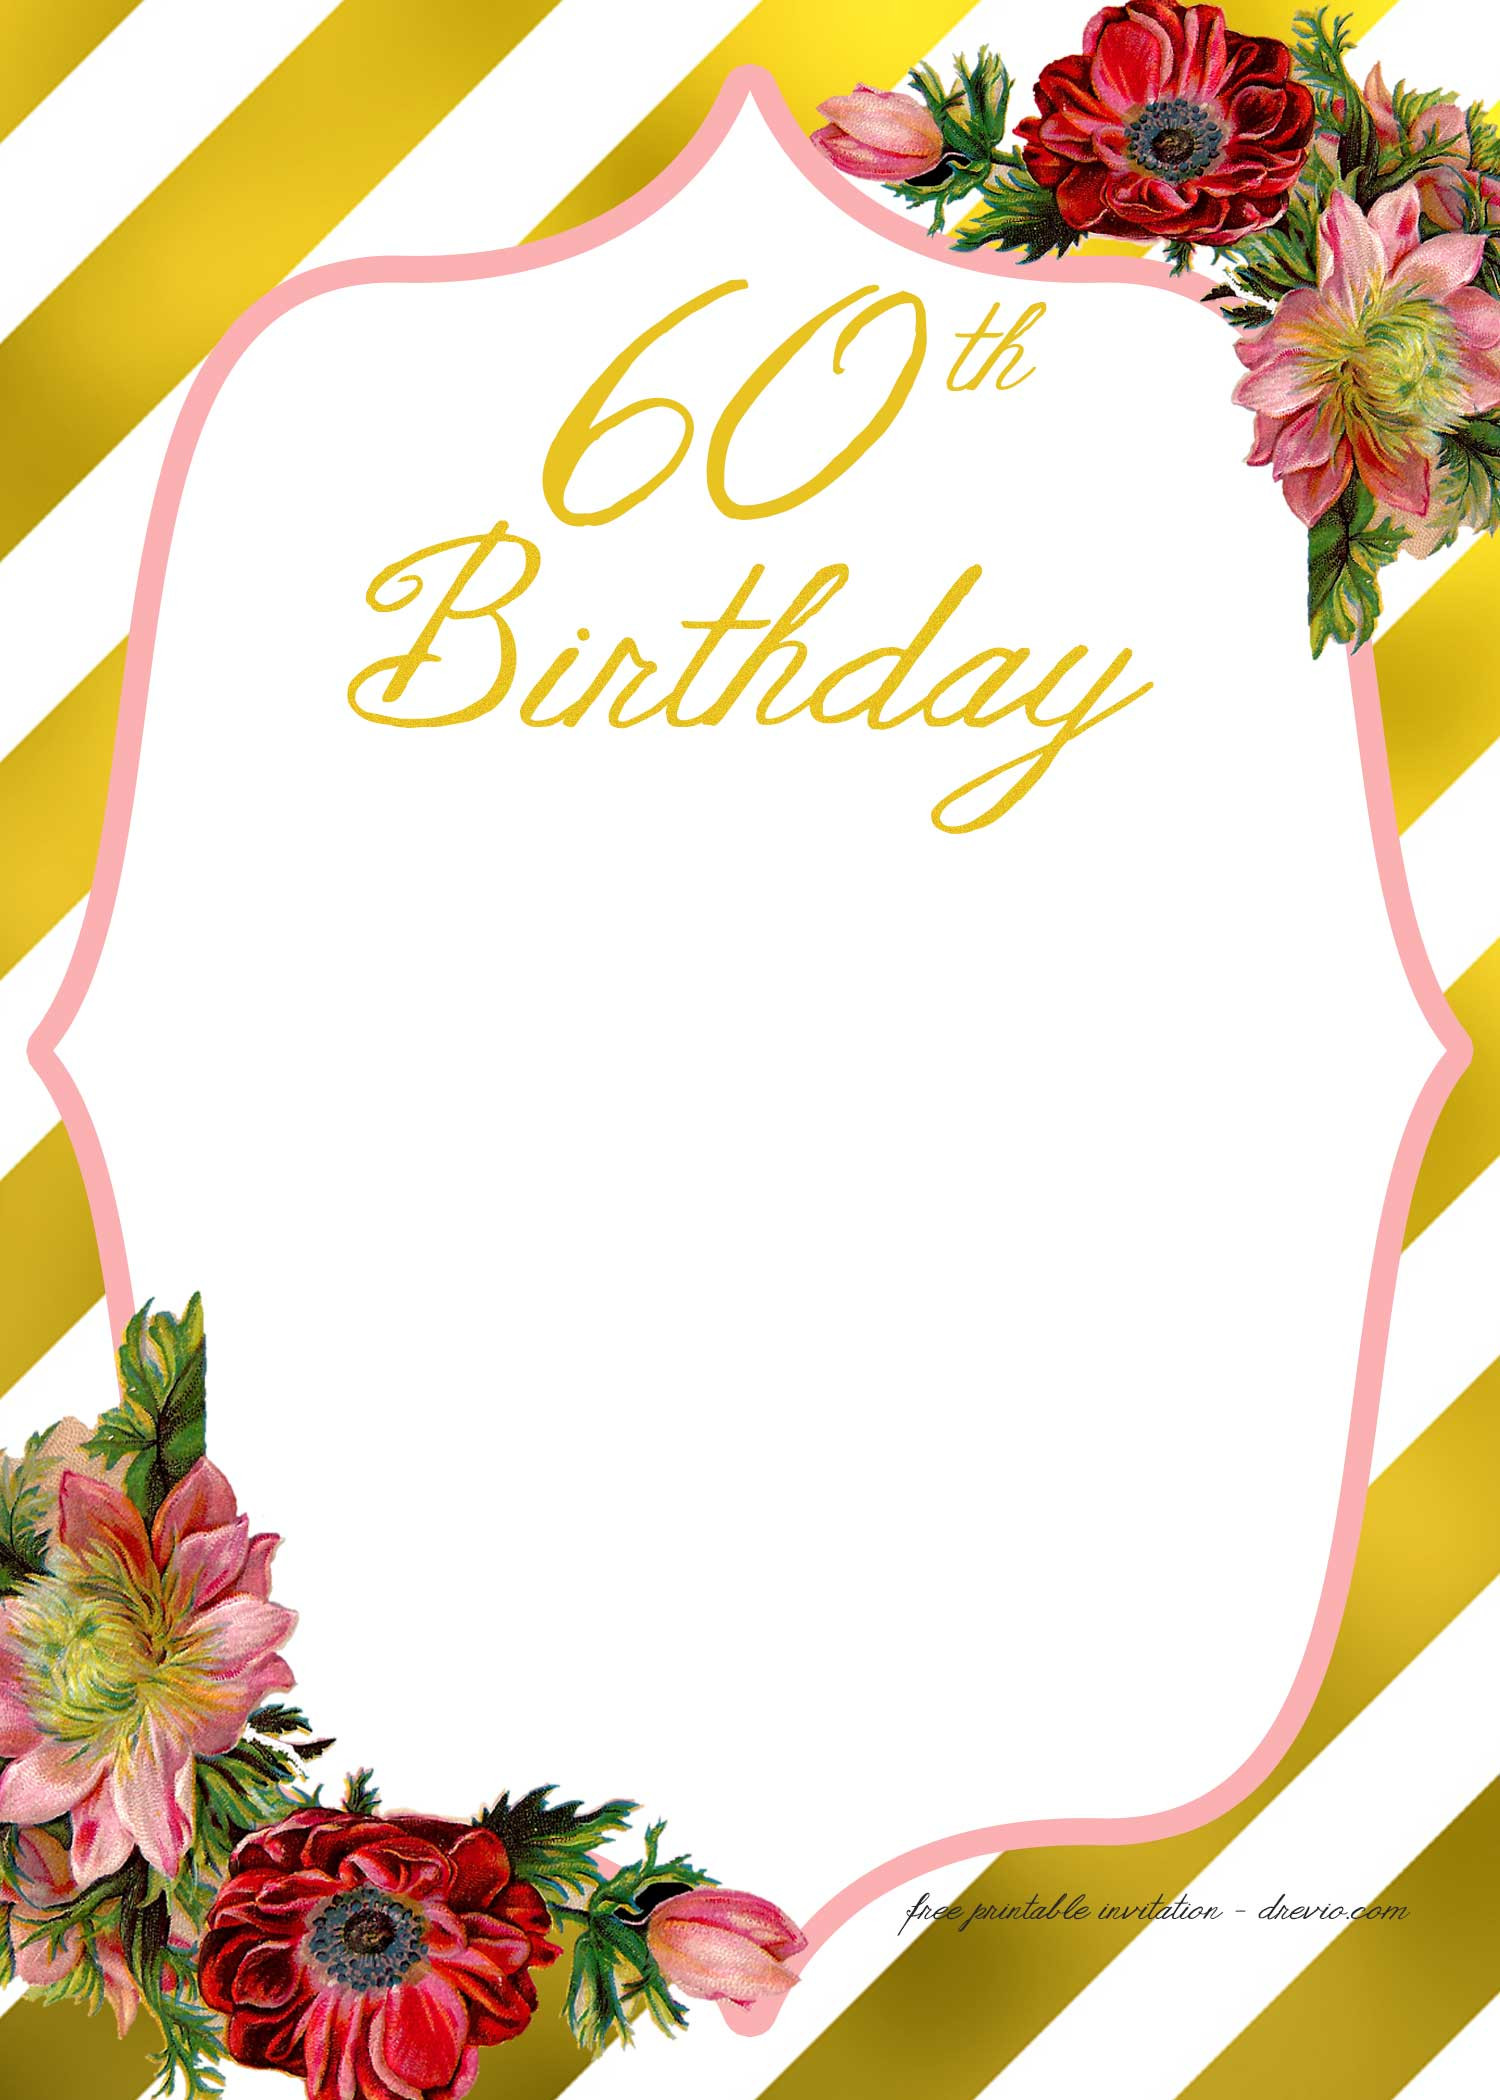 Free Birthday Invitation Templates
 Adult Birthday Invitations Template for 50th years old